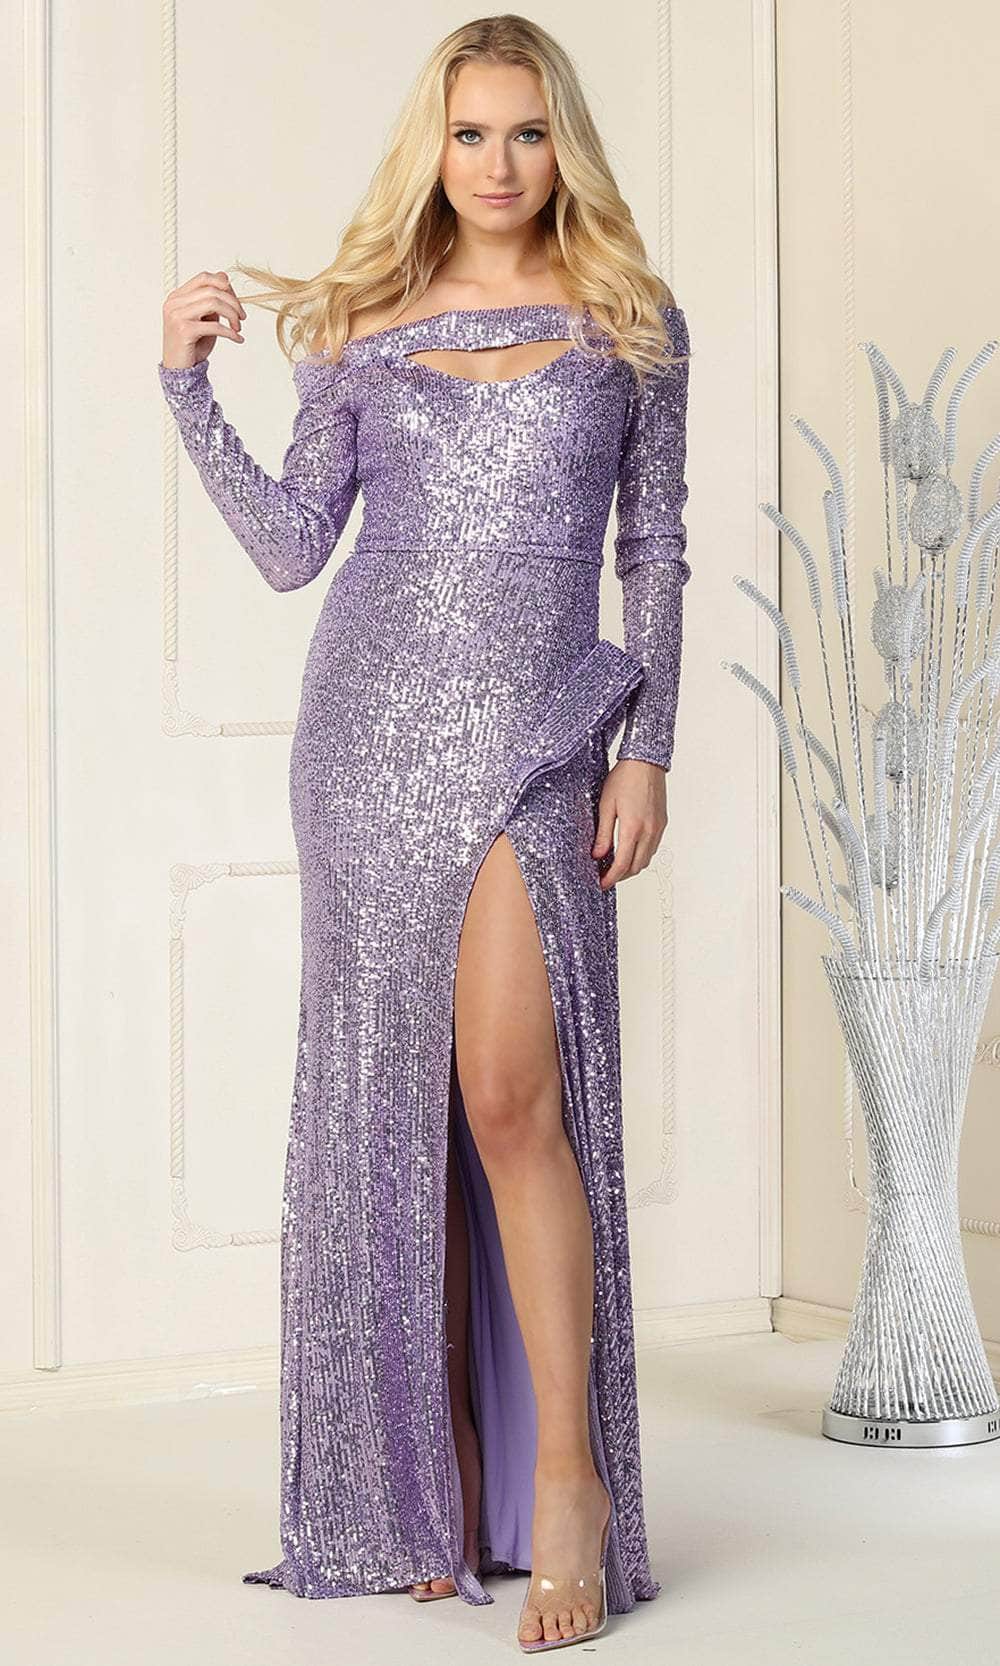 May Queen RQ7890 - Cutout Neckline Fully Sequined Evening Gown Special Occasion Dress 4 / Lilac